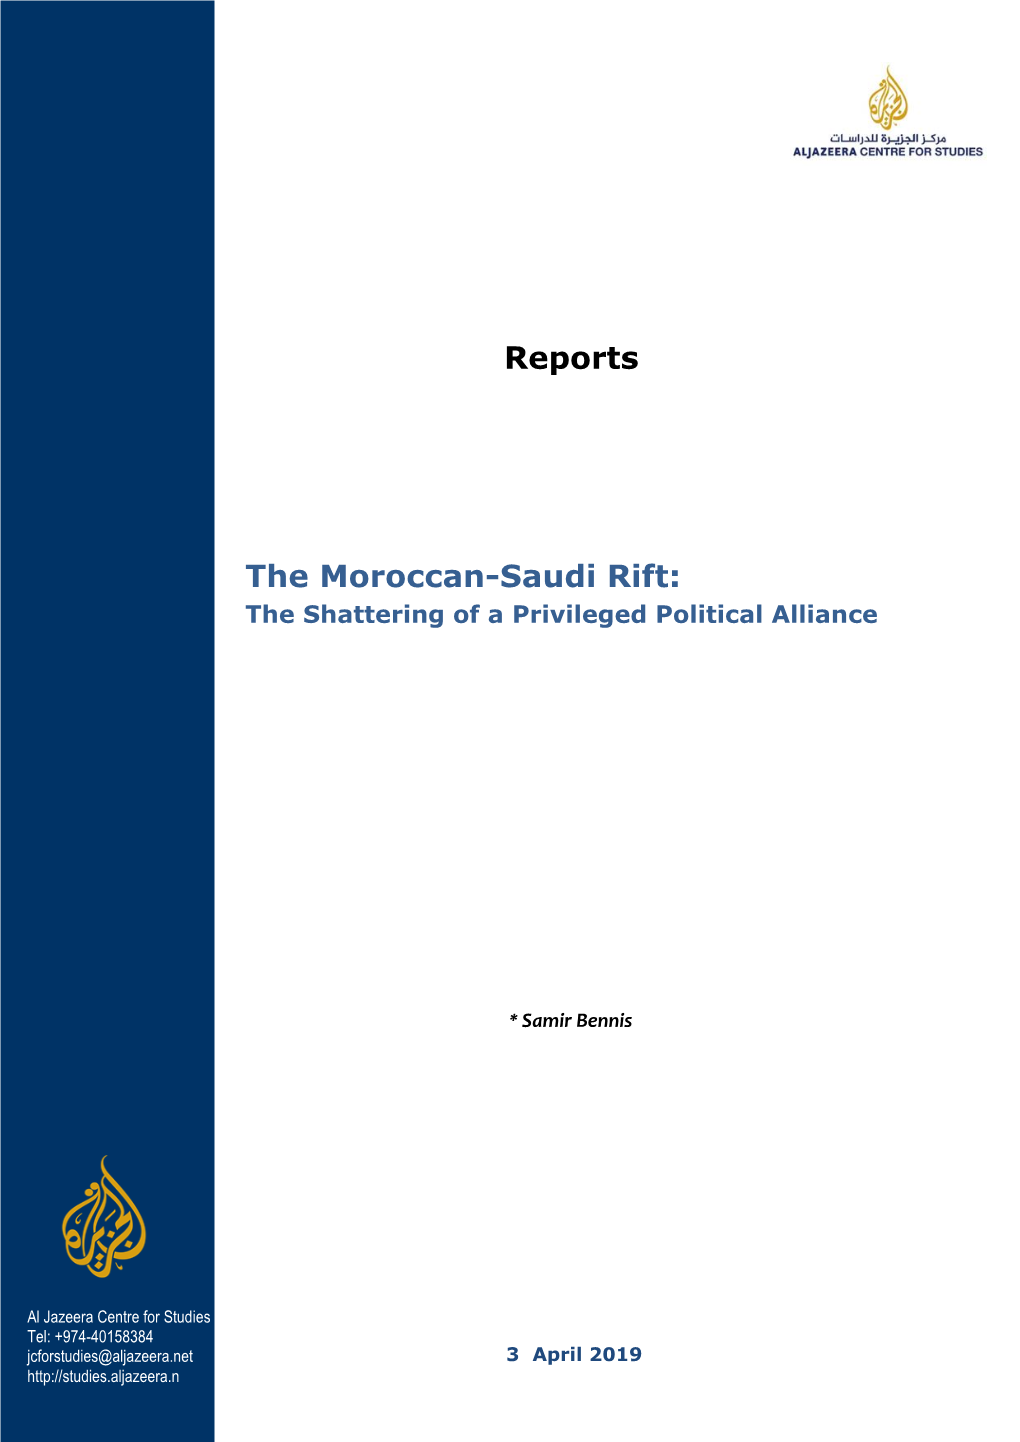 The Moroccan-Saudi Rift: the Shattering of a Privileged Political Alliance